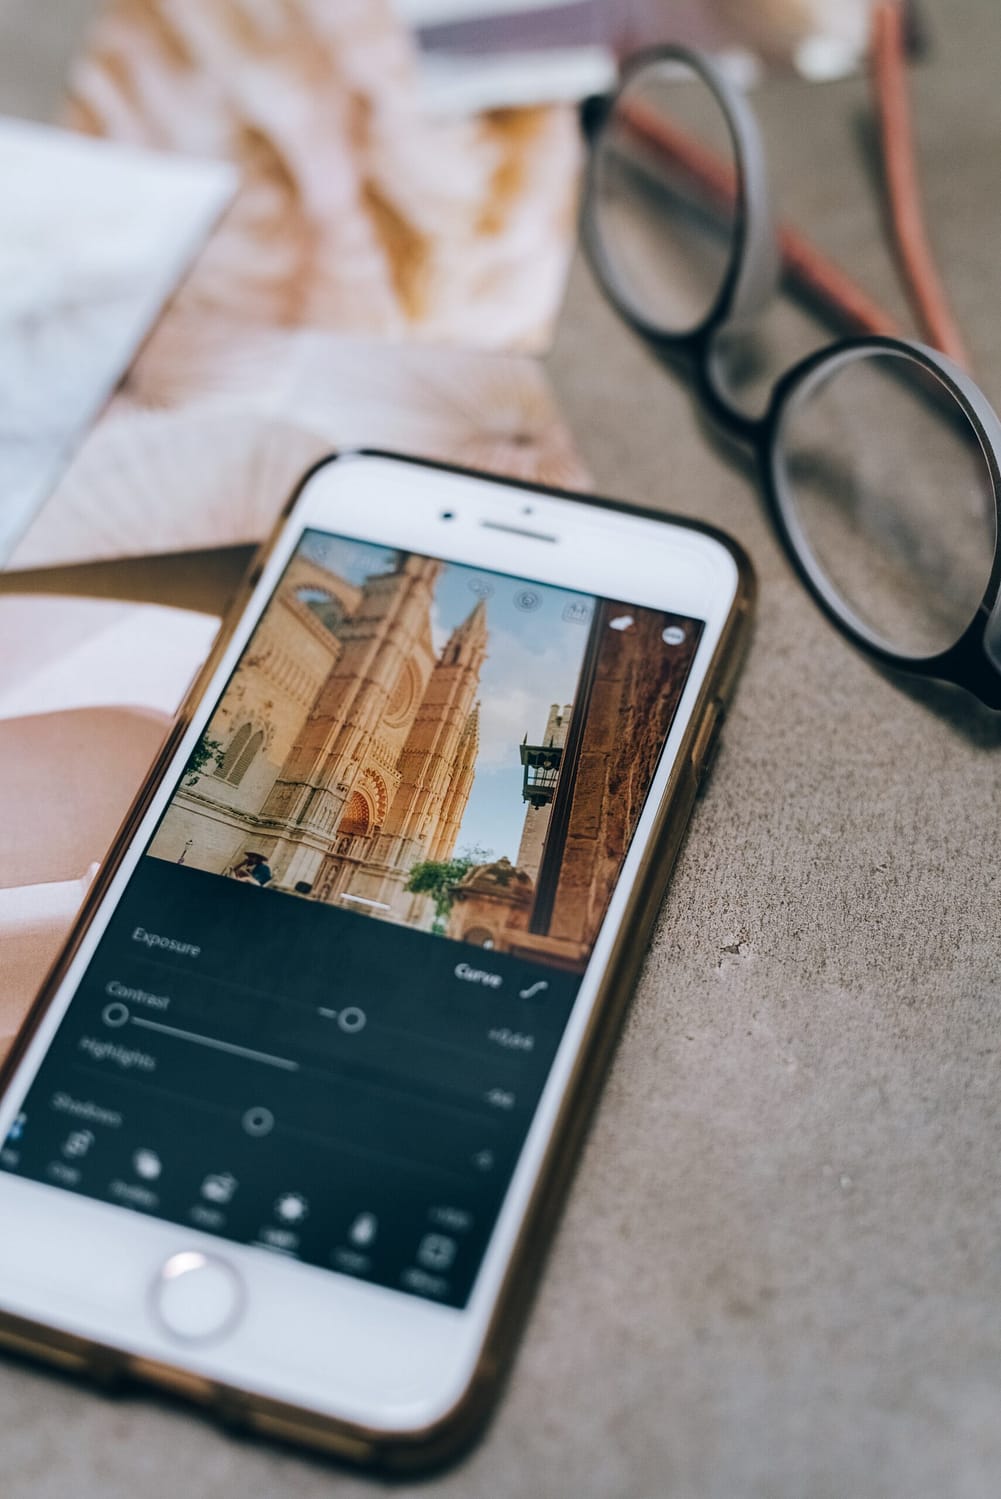 The Top iOS Apps for Editing Photos on Your iPhone or iPad